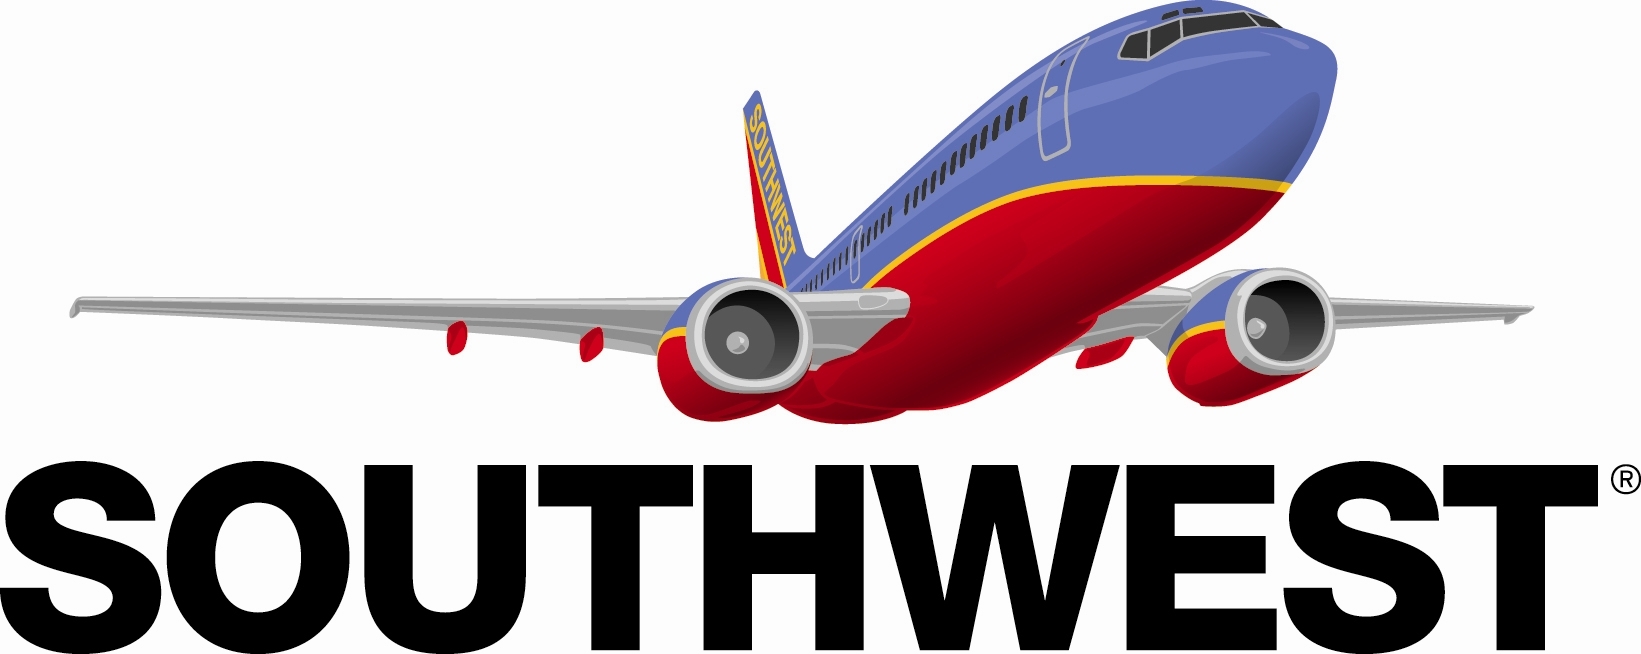 Southwest Airlines logo 02